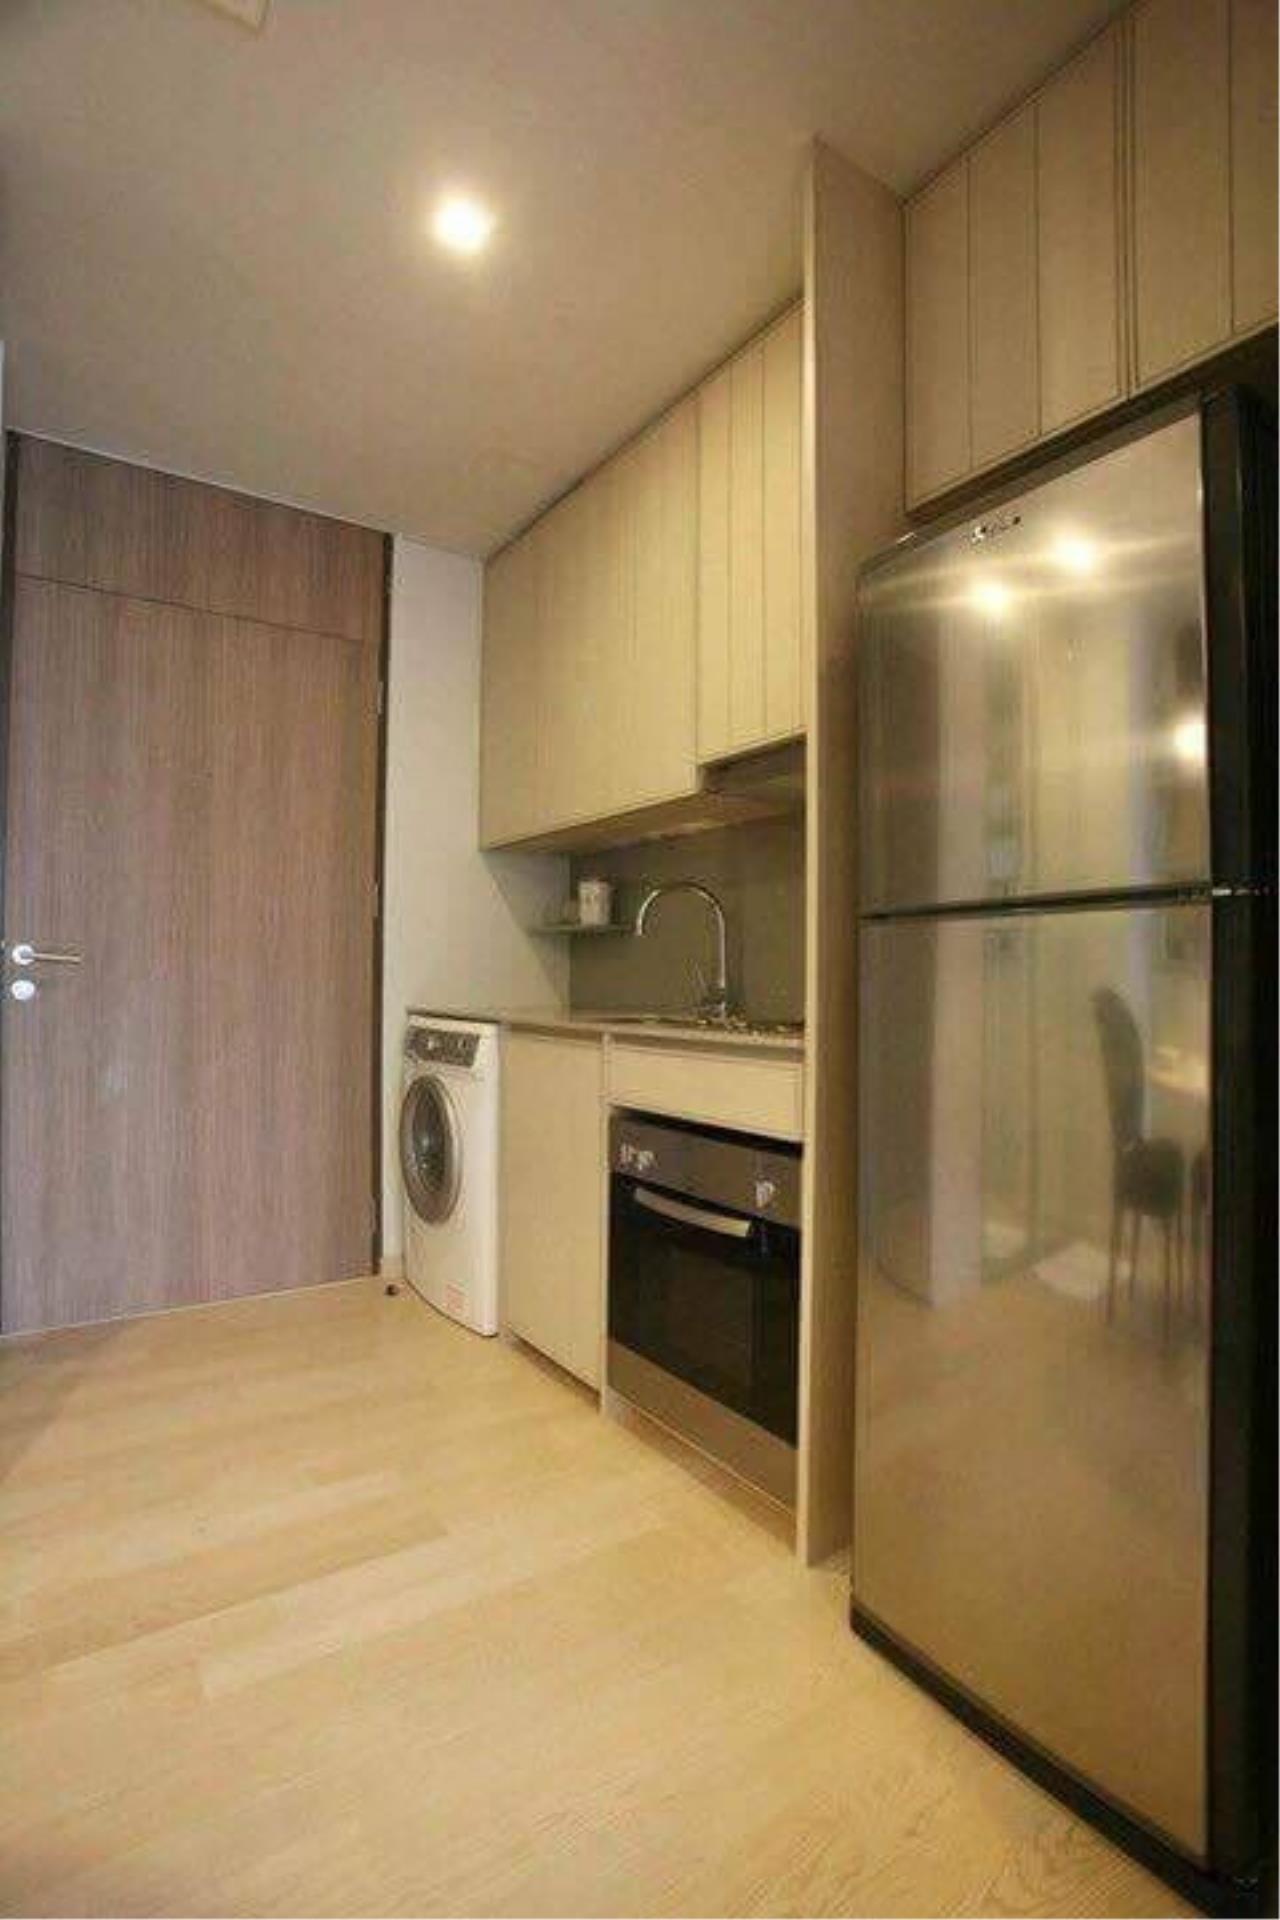 Quality Life Property Agency's S A L E WITH TENANT !! || NOBLE REMIX || 1BR 42 SQ.M., HIGH FLOOR  6